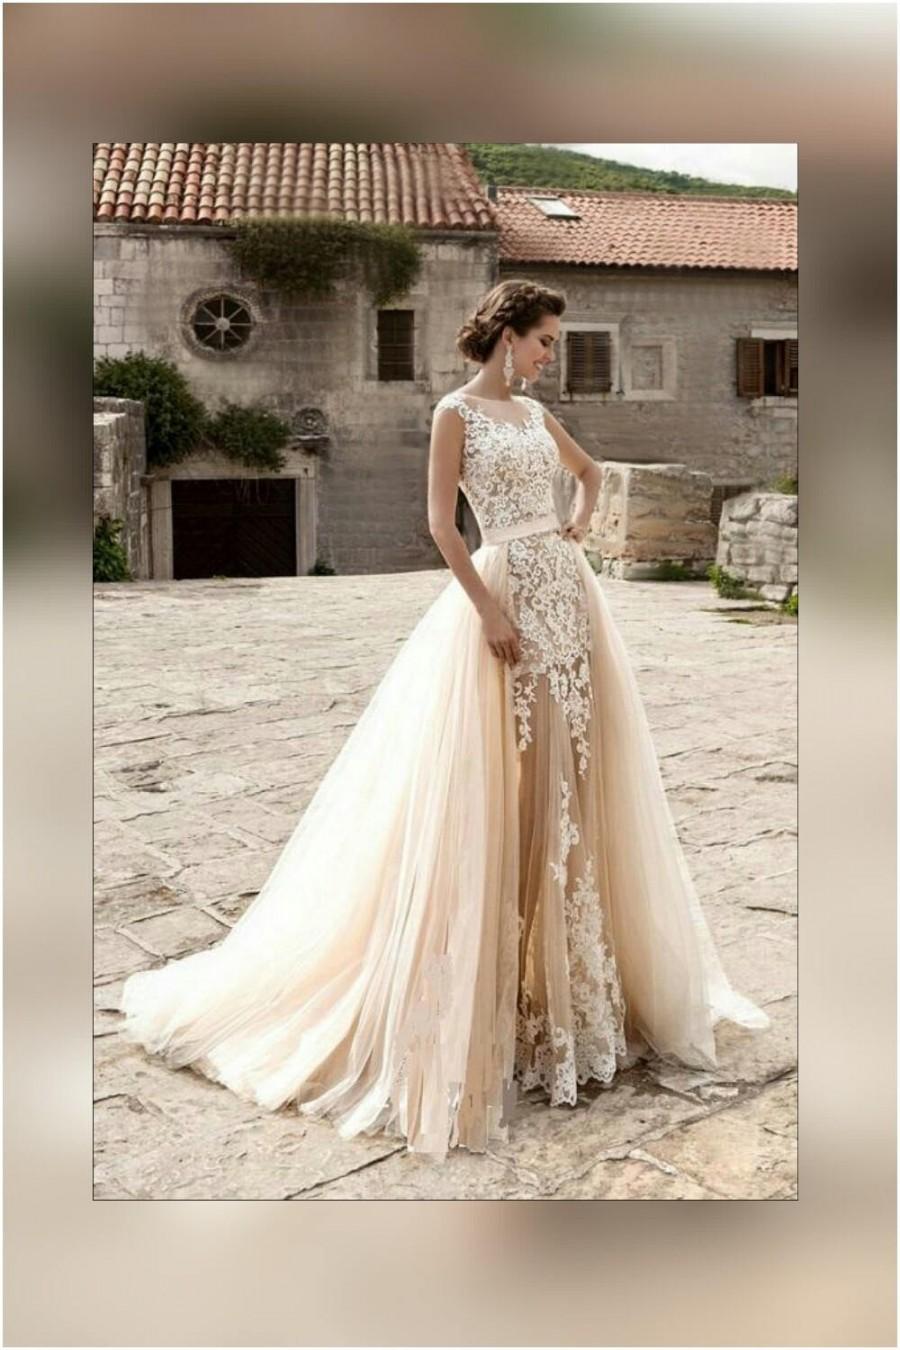 Hochzeit - Wedding dress light Peach Echo and white colors with detachable train, tulle bridal removable skirt with train